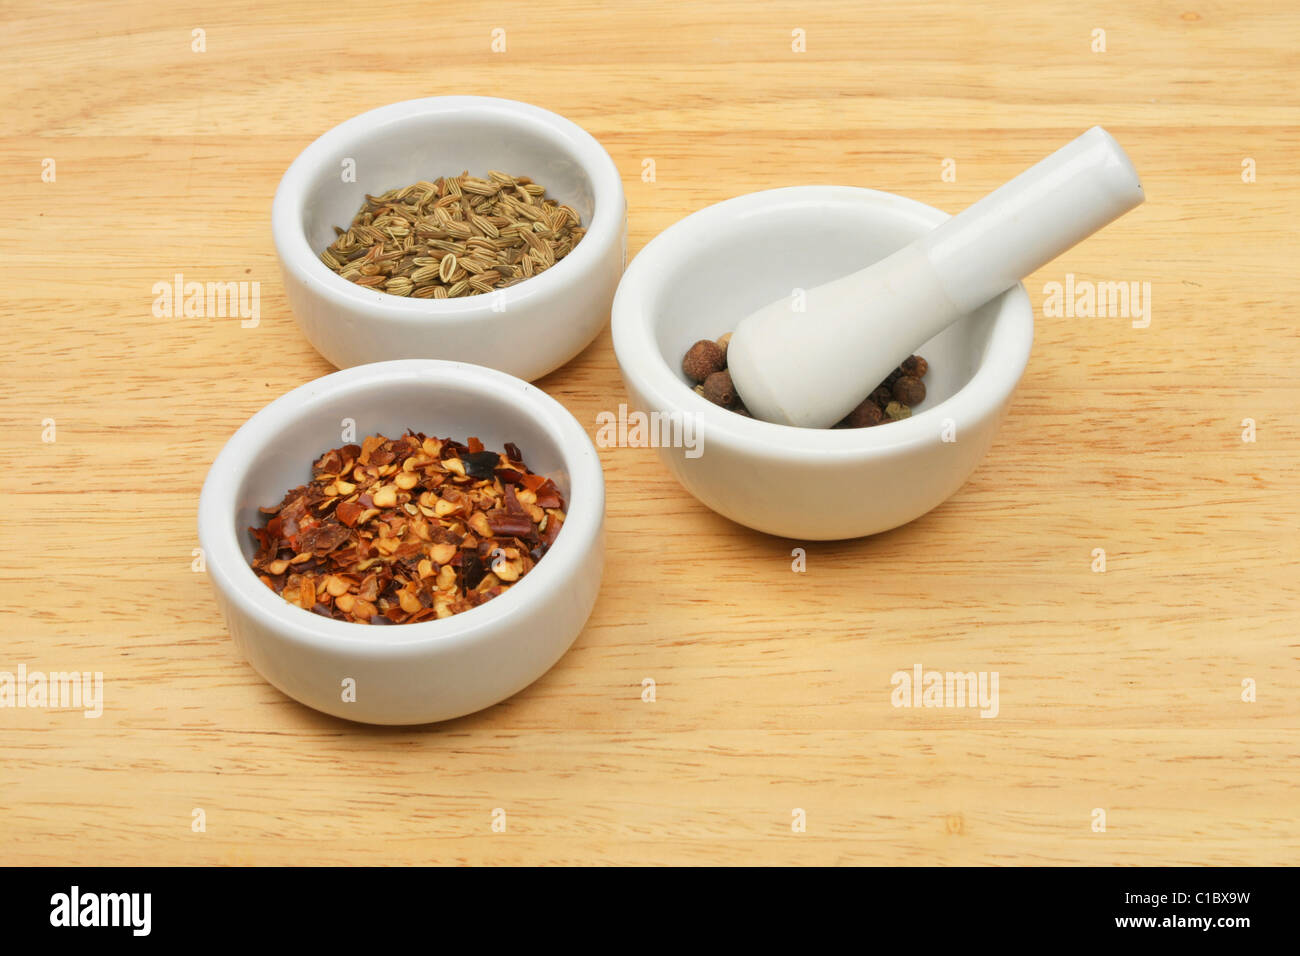 Spices in a ramekins and a pestle and mortar Stock Photo